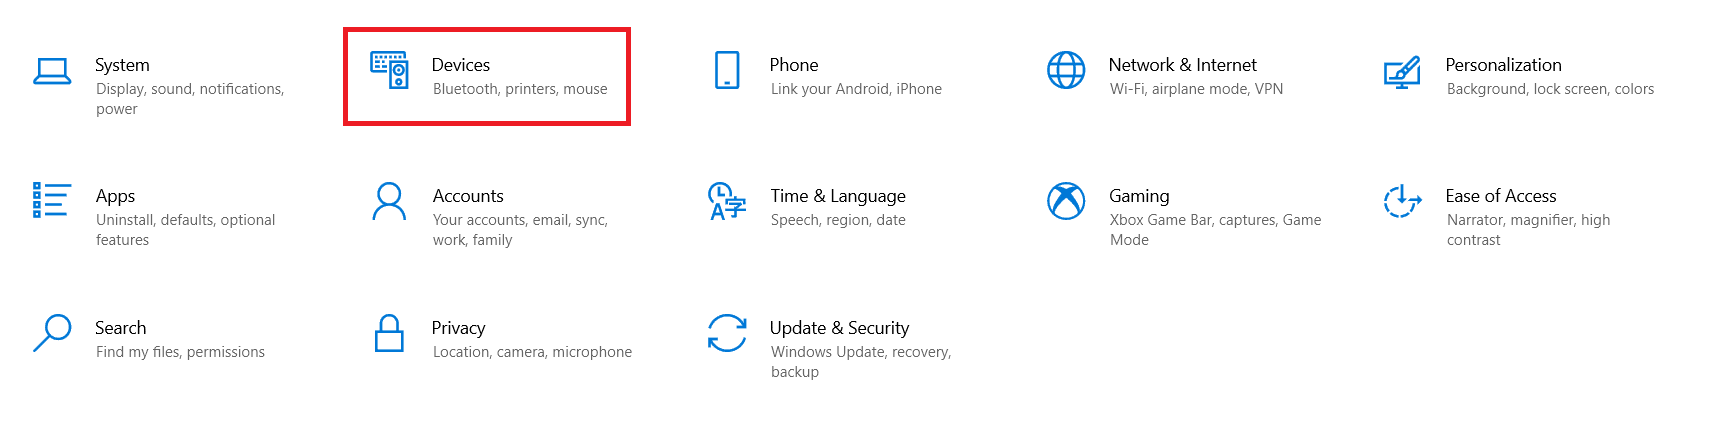 Choose Devices from the given tile.